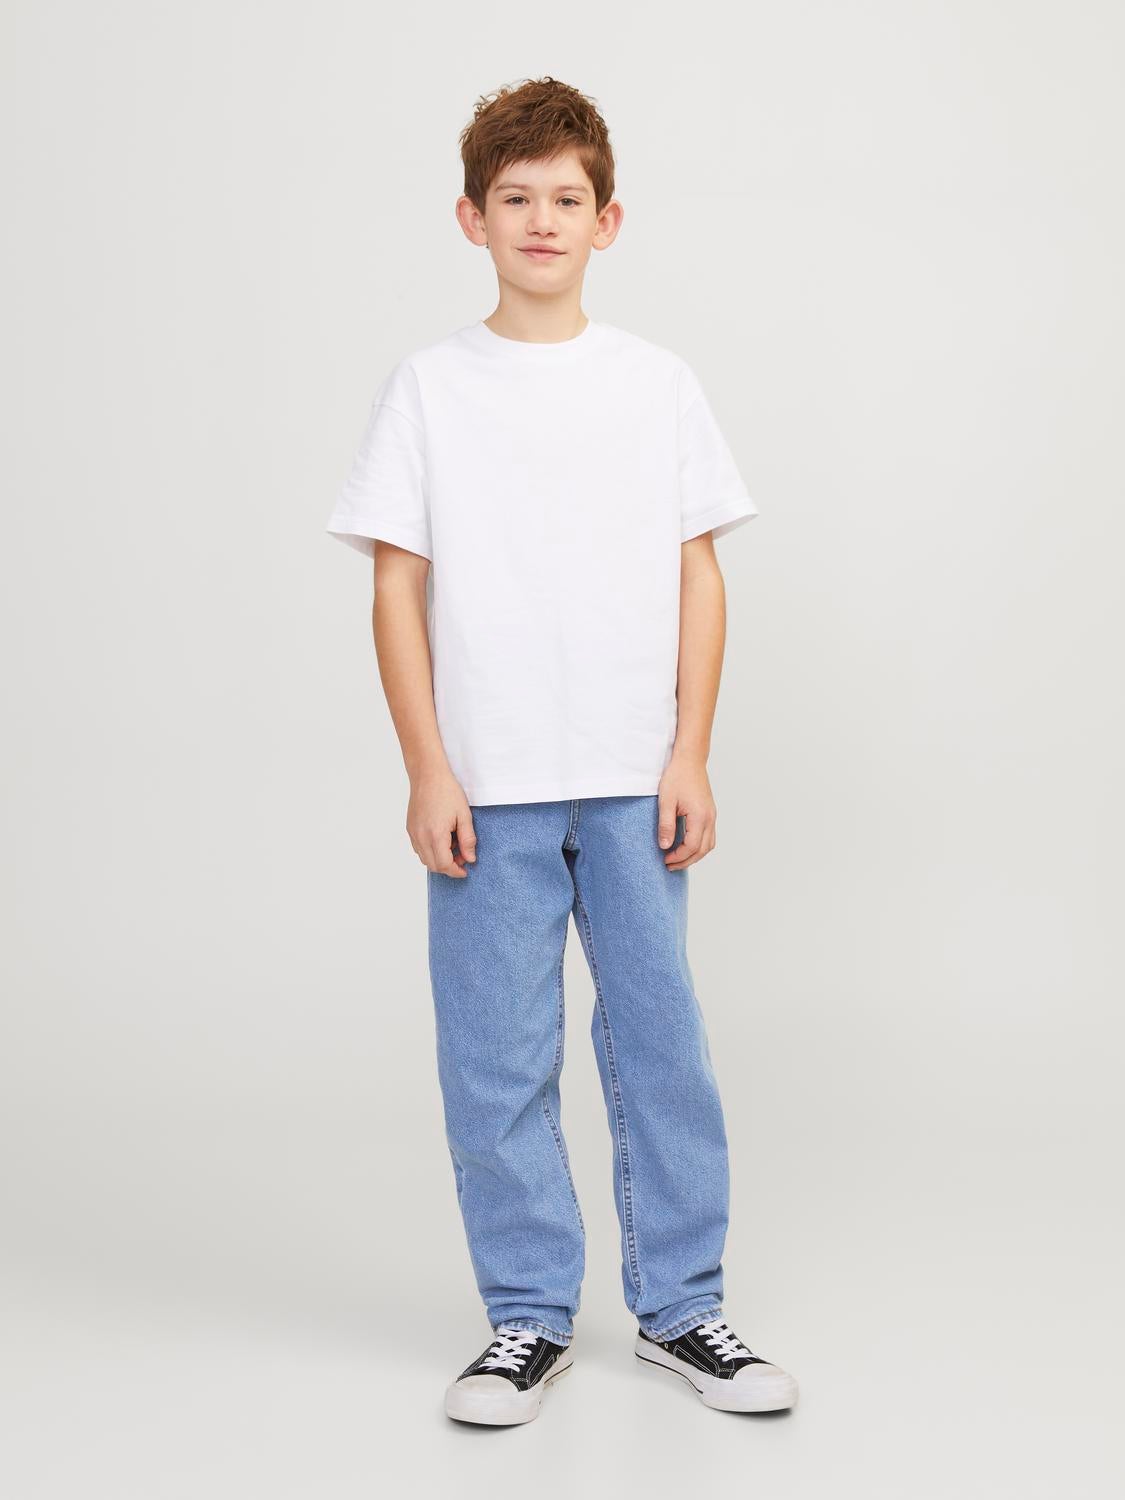 JWCHRIS JJIORIGINAL SQ 951 Relaxed Fit Jeans For boys